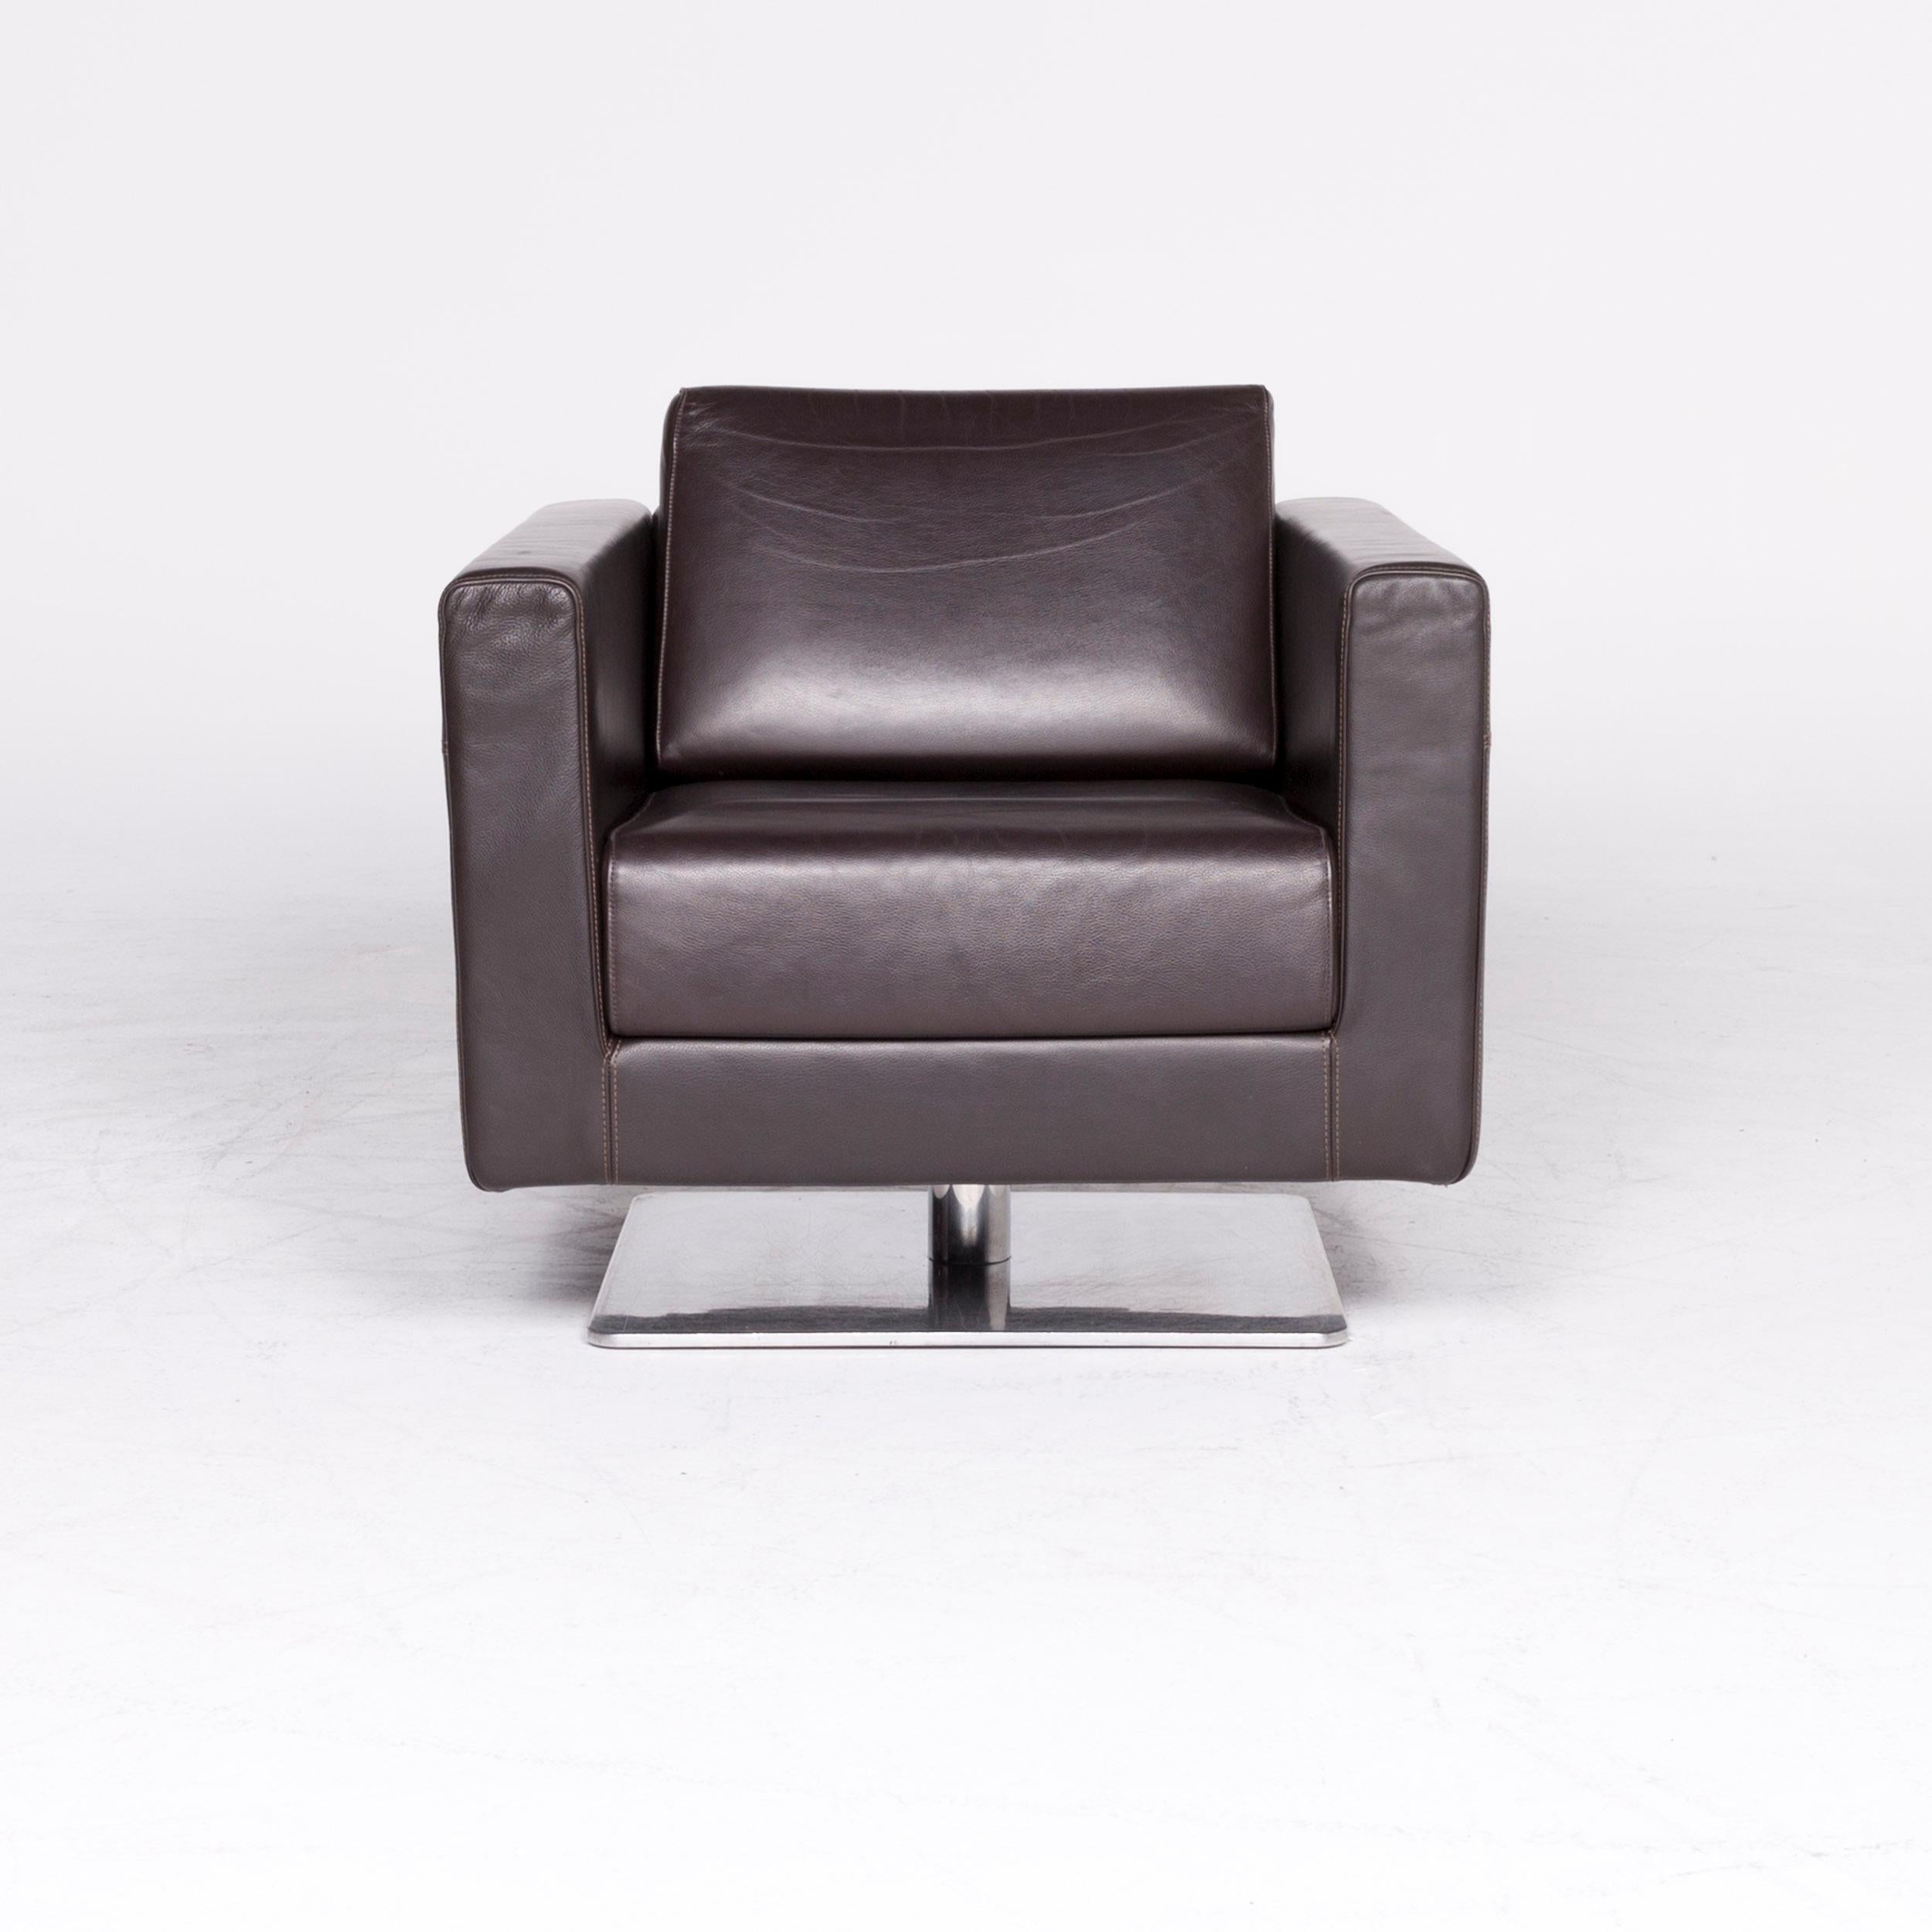 We bring to you a Vitra Park Swivel armchair 2x designer armchair set leather brown chocolate.
 

Product measures in centimeters:

Depth: 83
Width: 76
Height: 76
Seat-height: 44
Rest-height: 61
Seat-depth: 53.


 